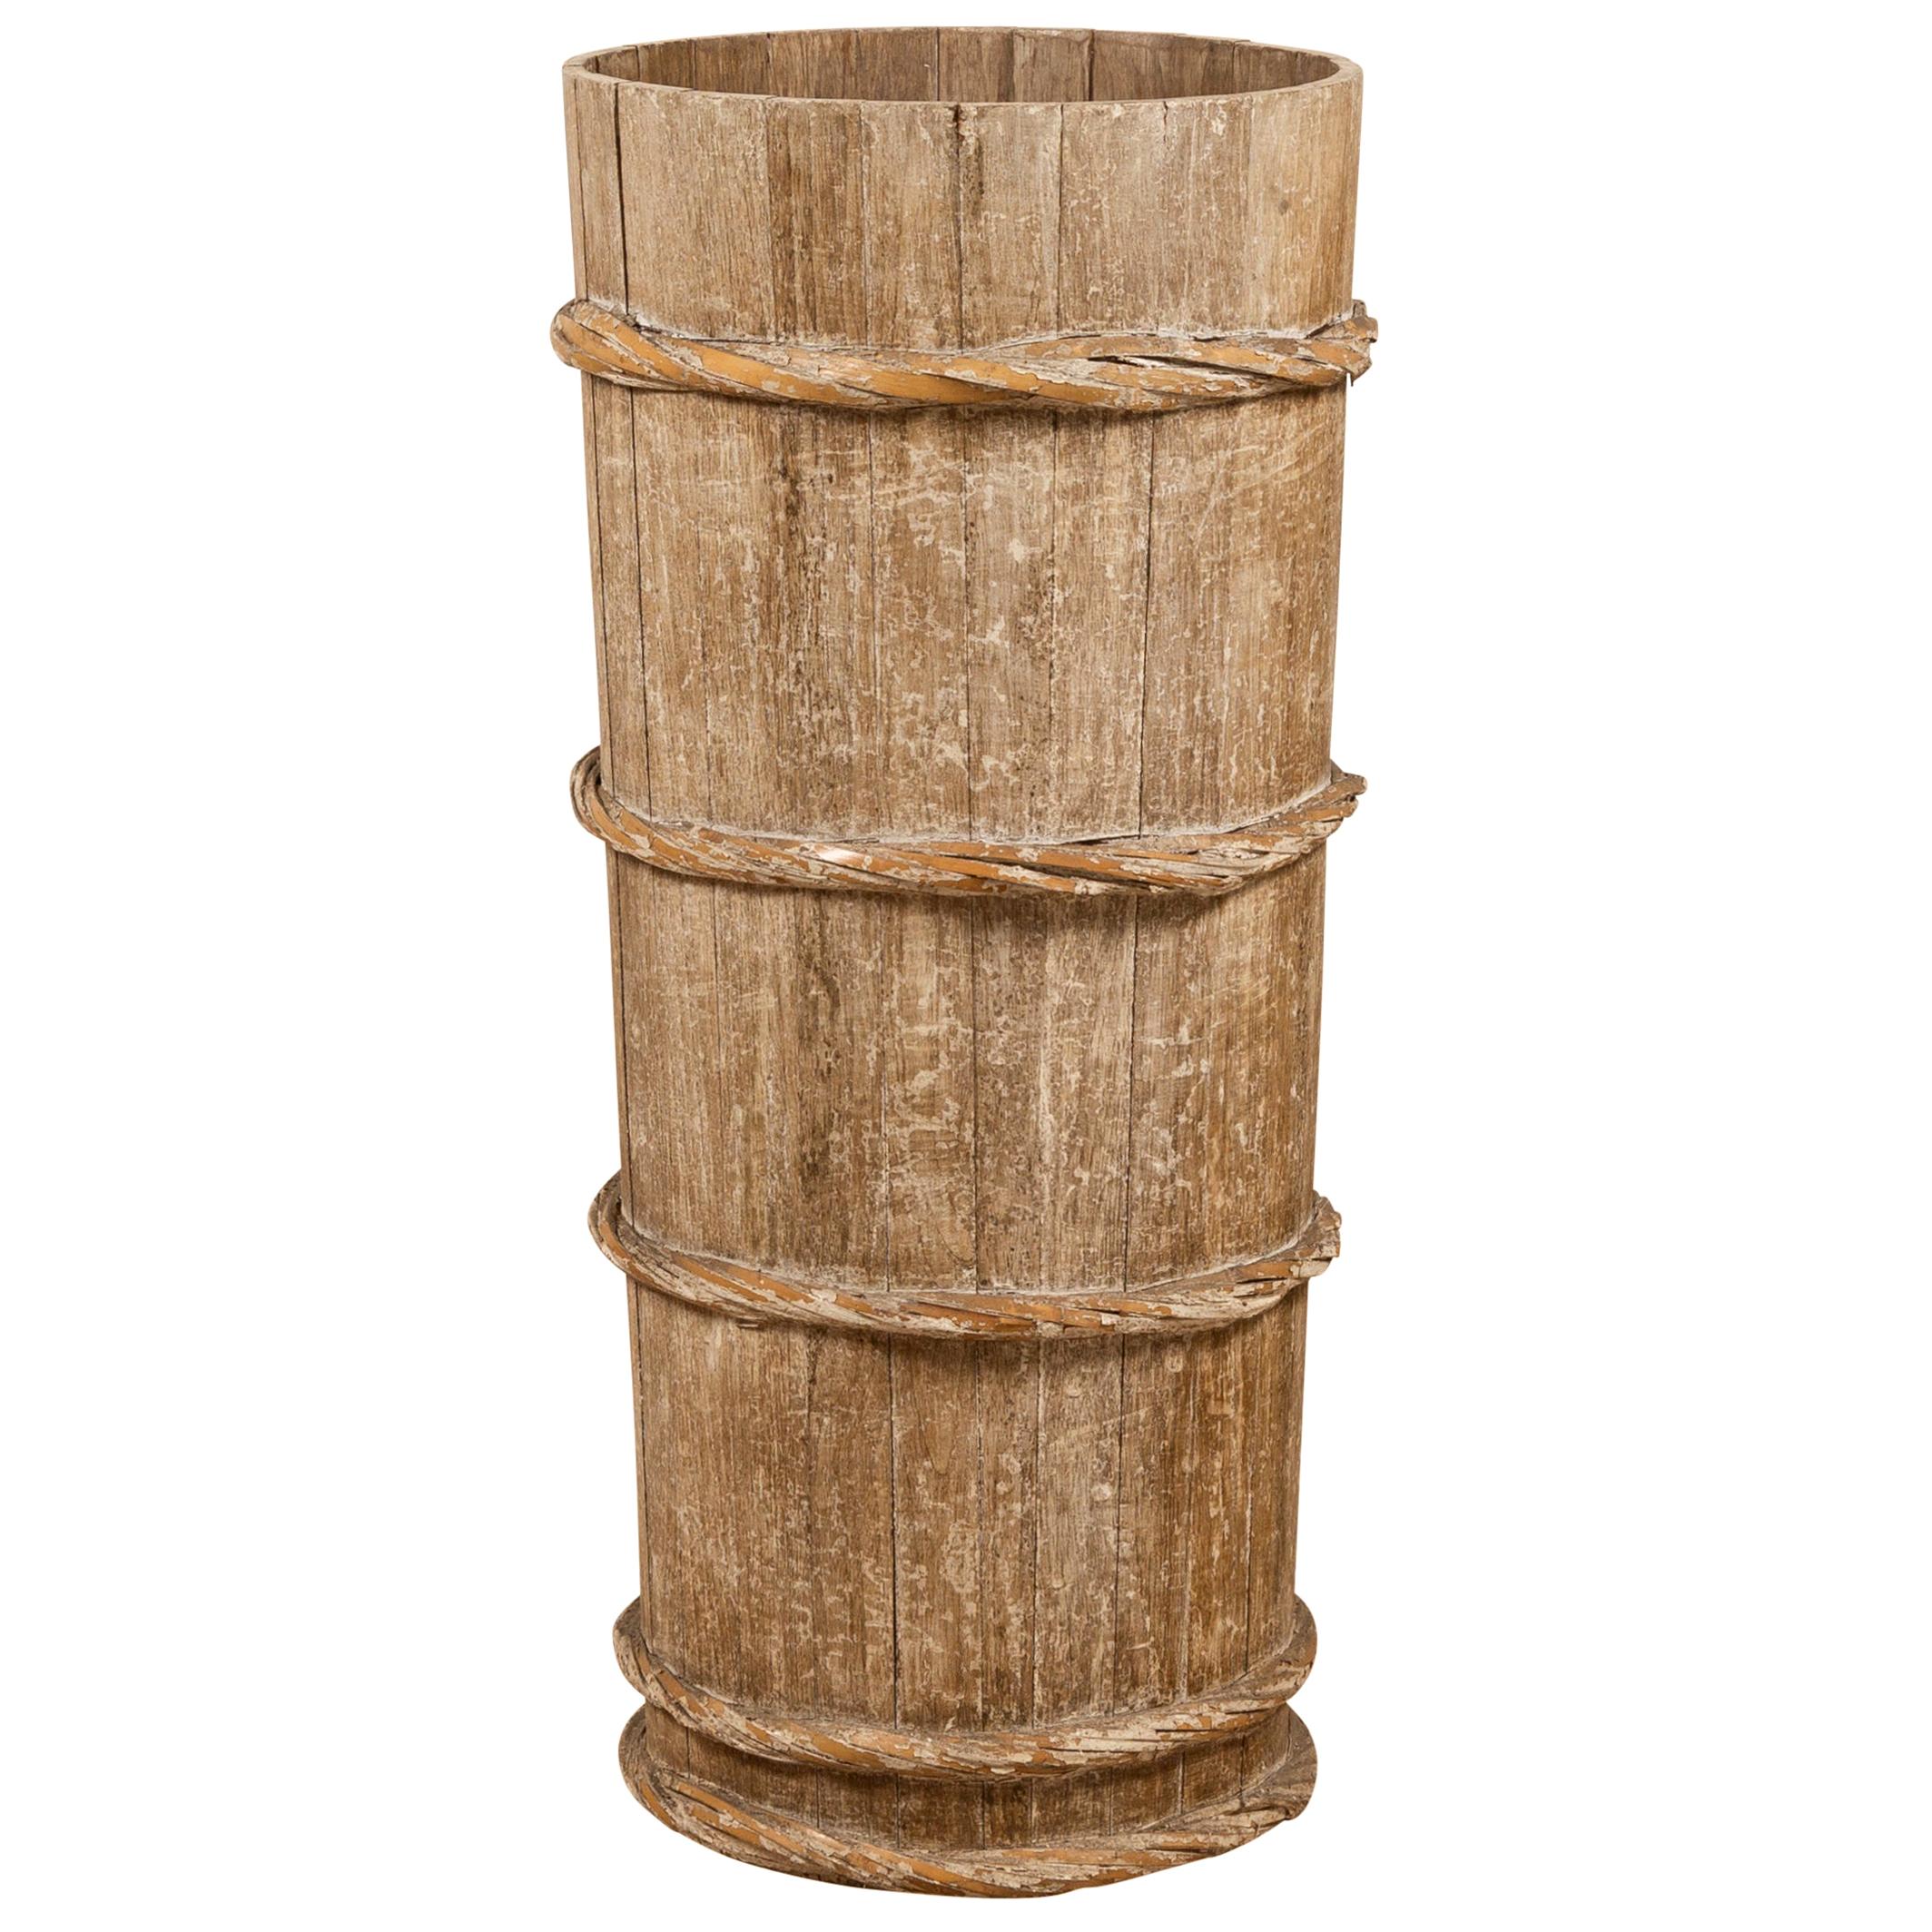 Tall Vintage Rustic Wooden Barrel with Slatted Body and Rope-Style Motifs